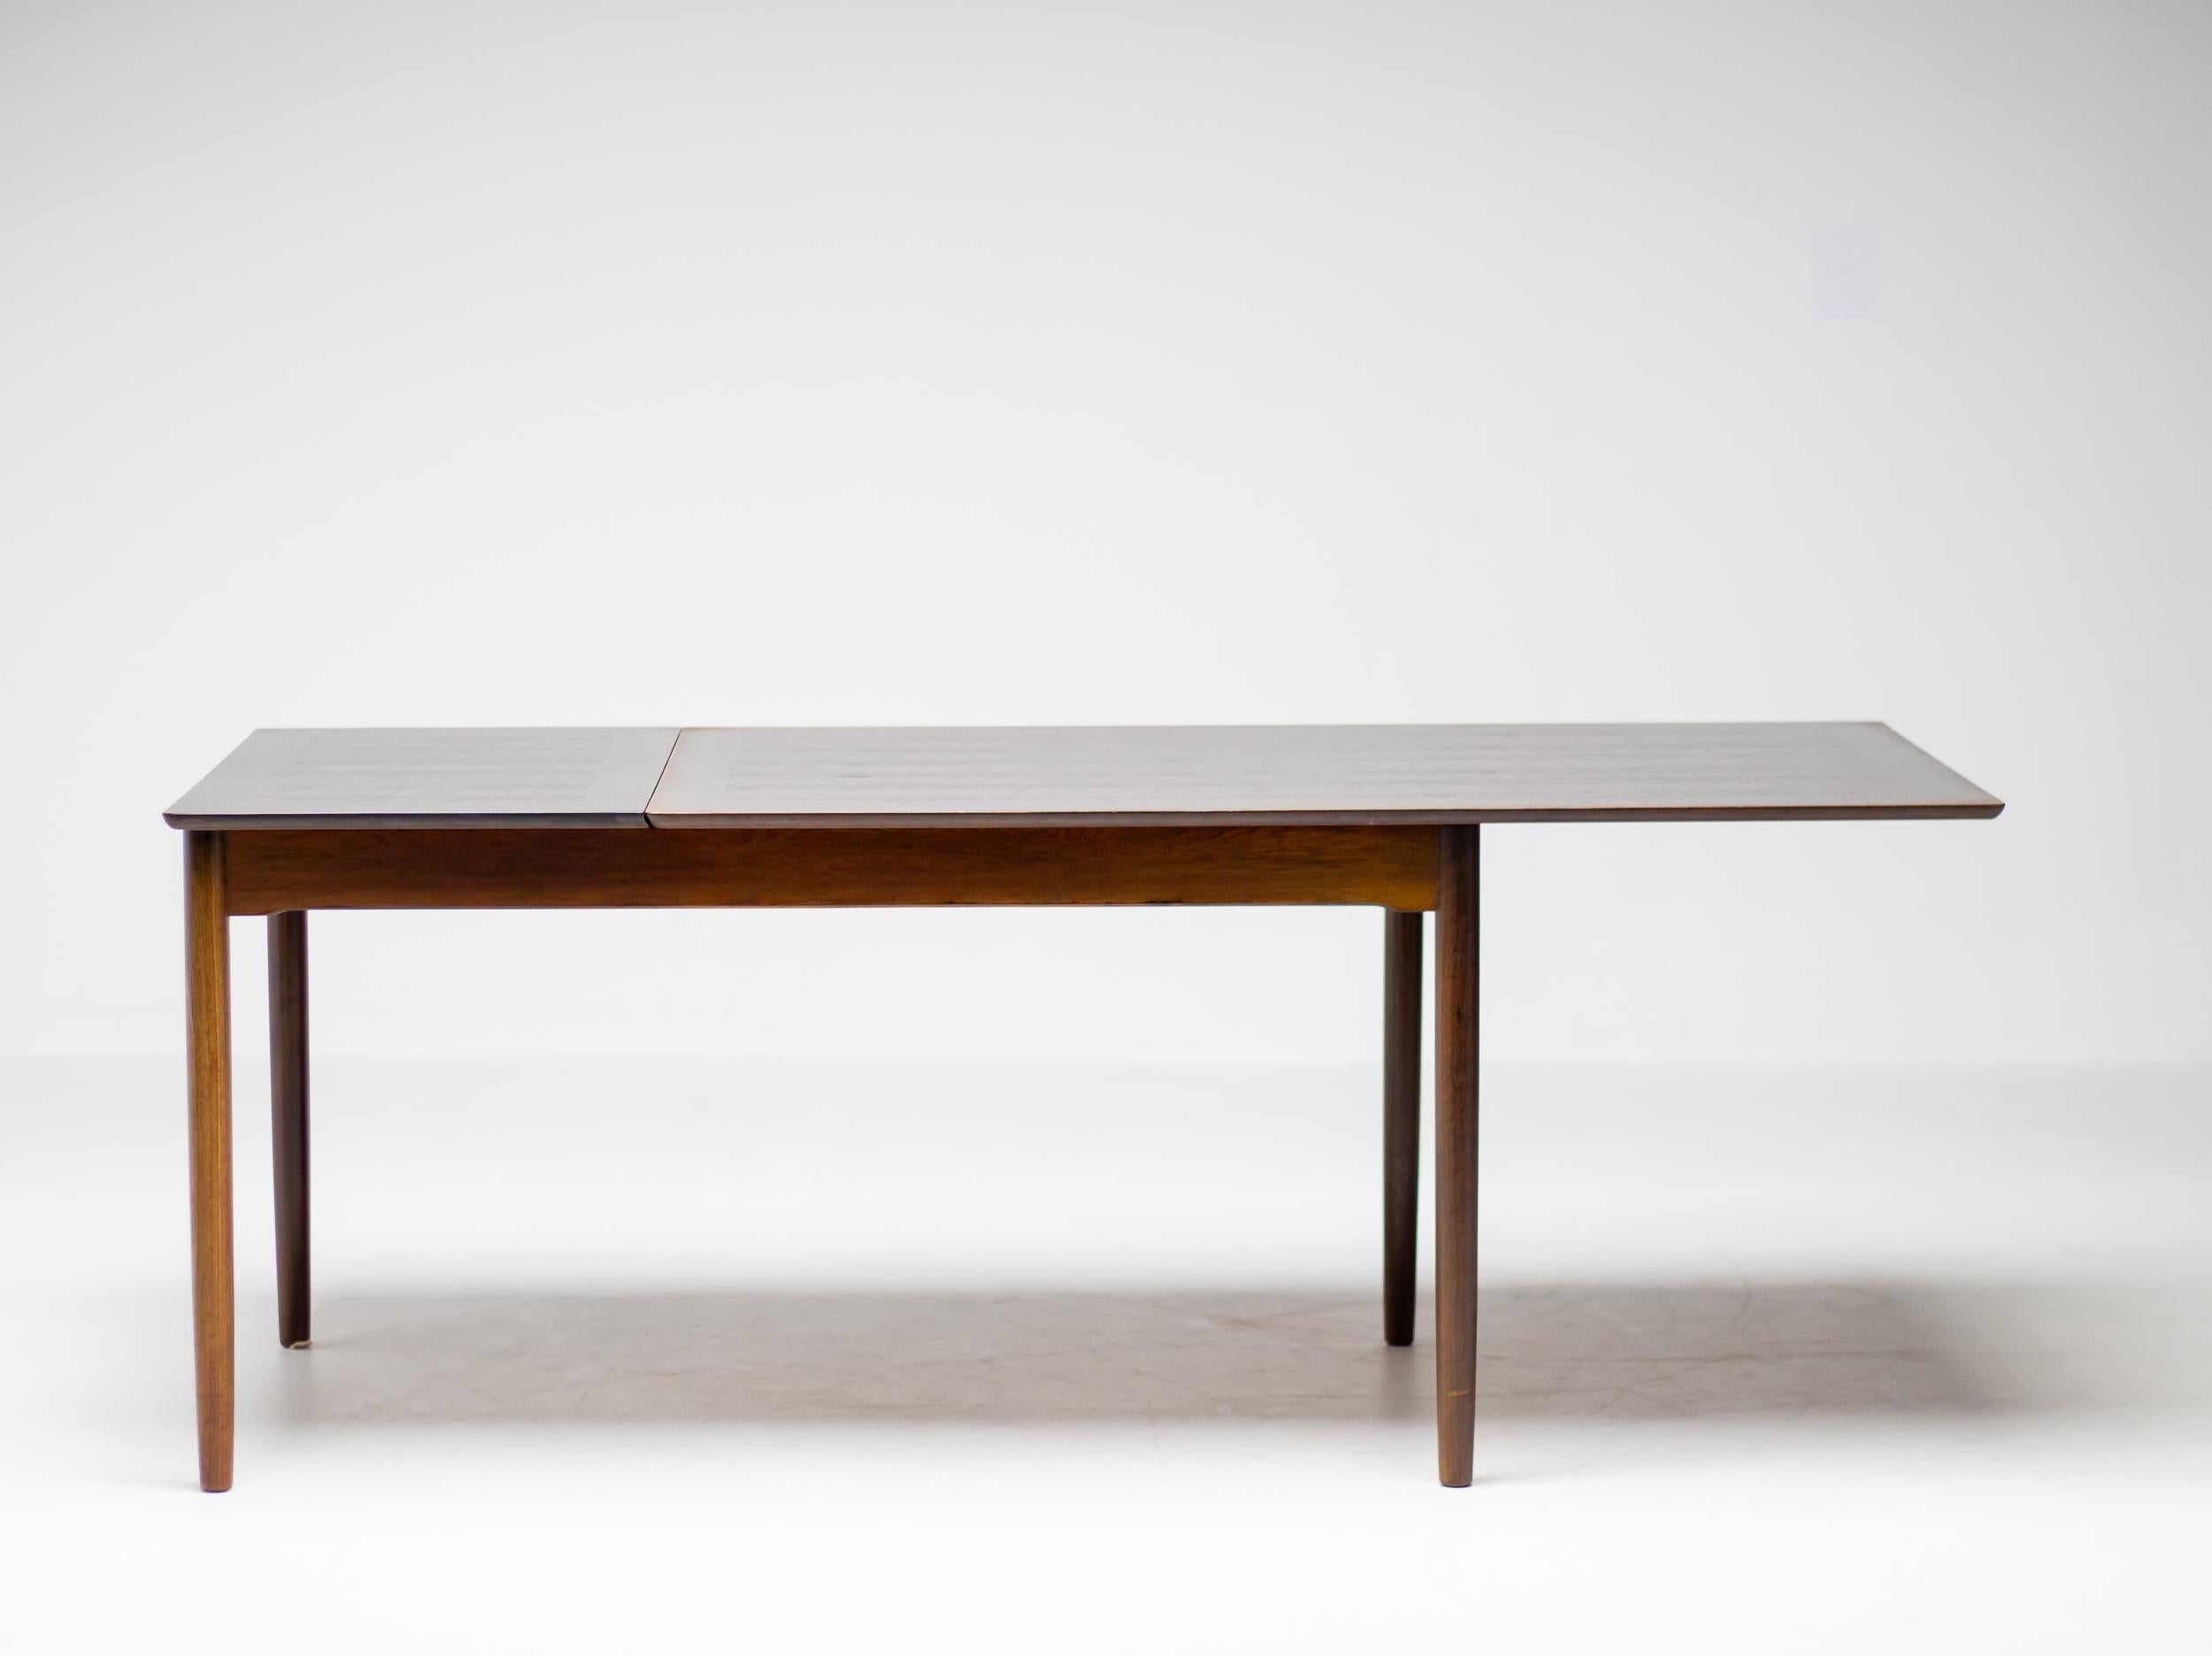 Beautiful, refined Mid Century Modern dining table executed in rosewood that extends easily.
The 4 legs also disassemble easily making this versatile, sturdy table very suitable for people who move around regularly.

Fristho, an esteemed Dutch